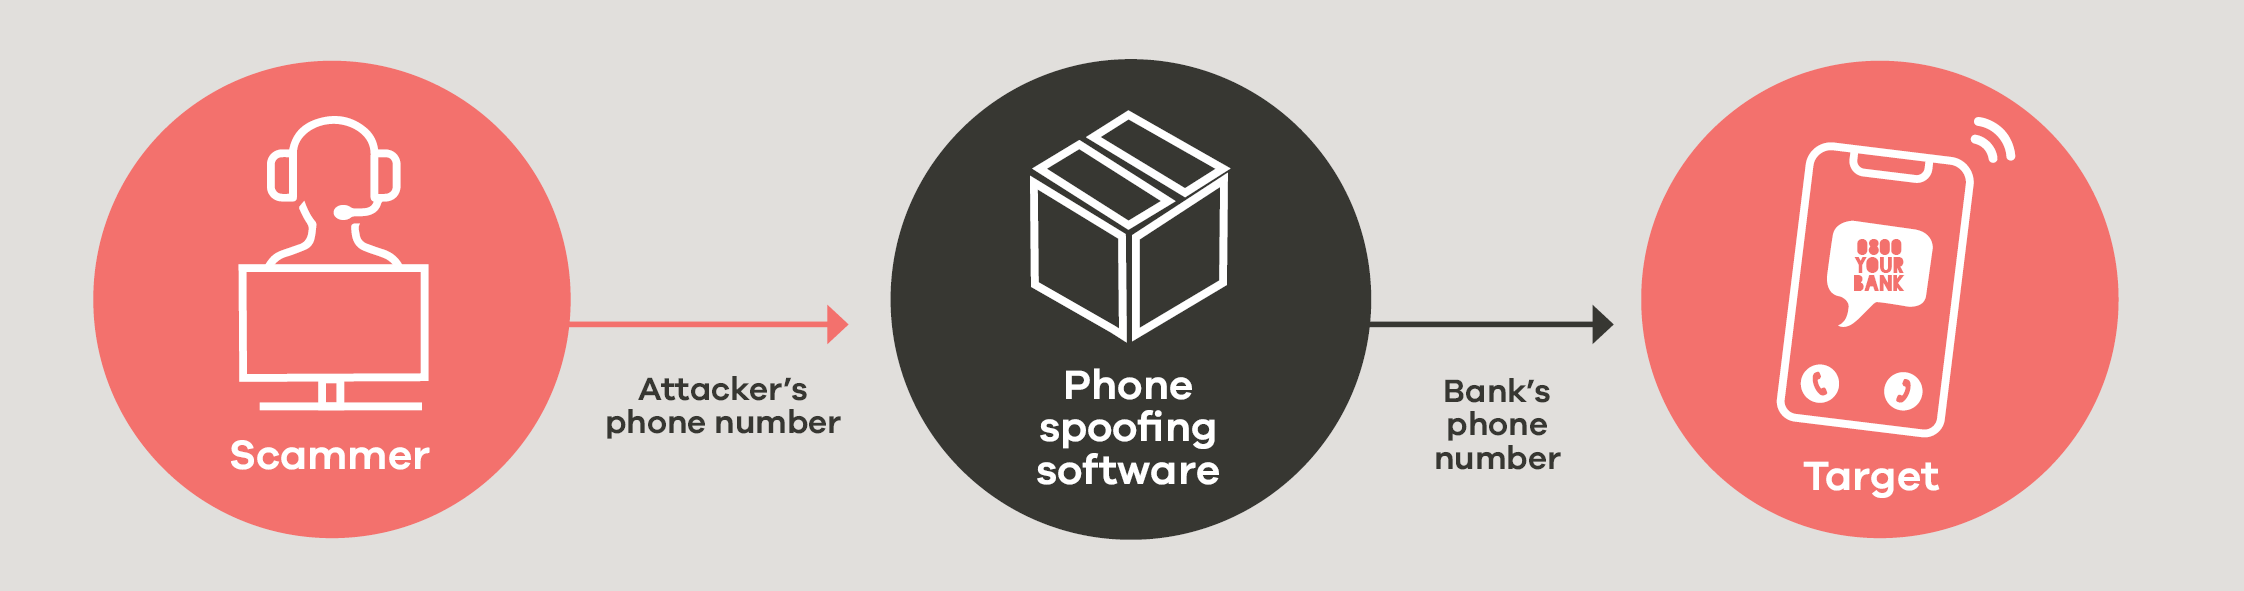 Phone spoofing diagram: The scammers uses  intermediary software that generates signals to hide their phone number. Then the number the scammer chooses is displayed on the caller ID instead.